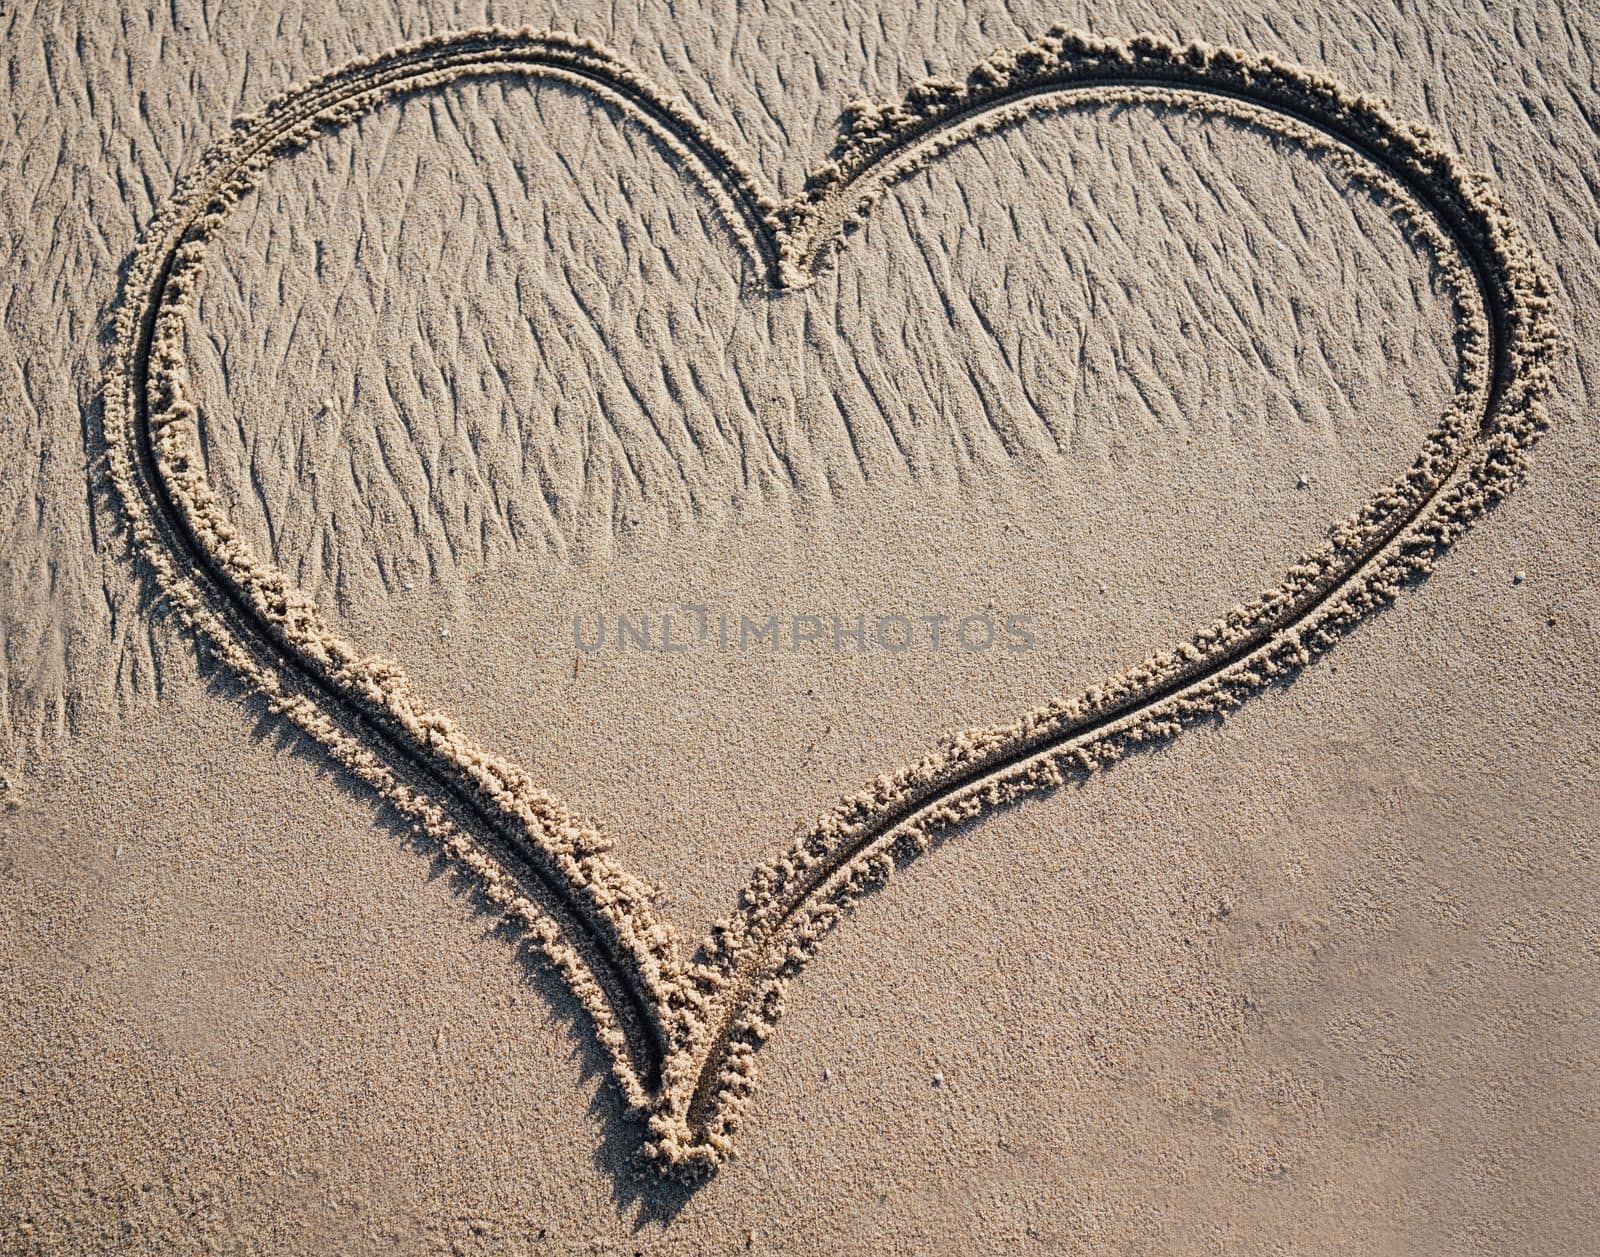 A big heart shape drawn in the sand with copy space.